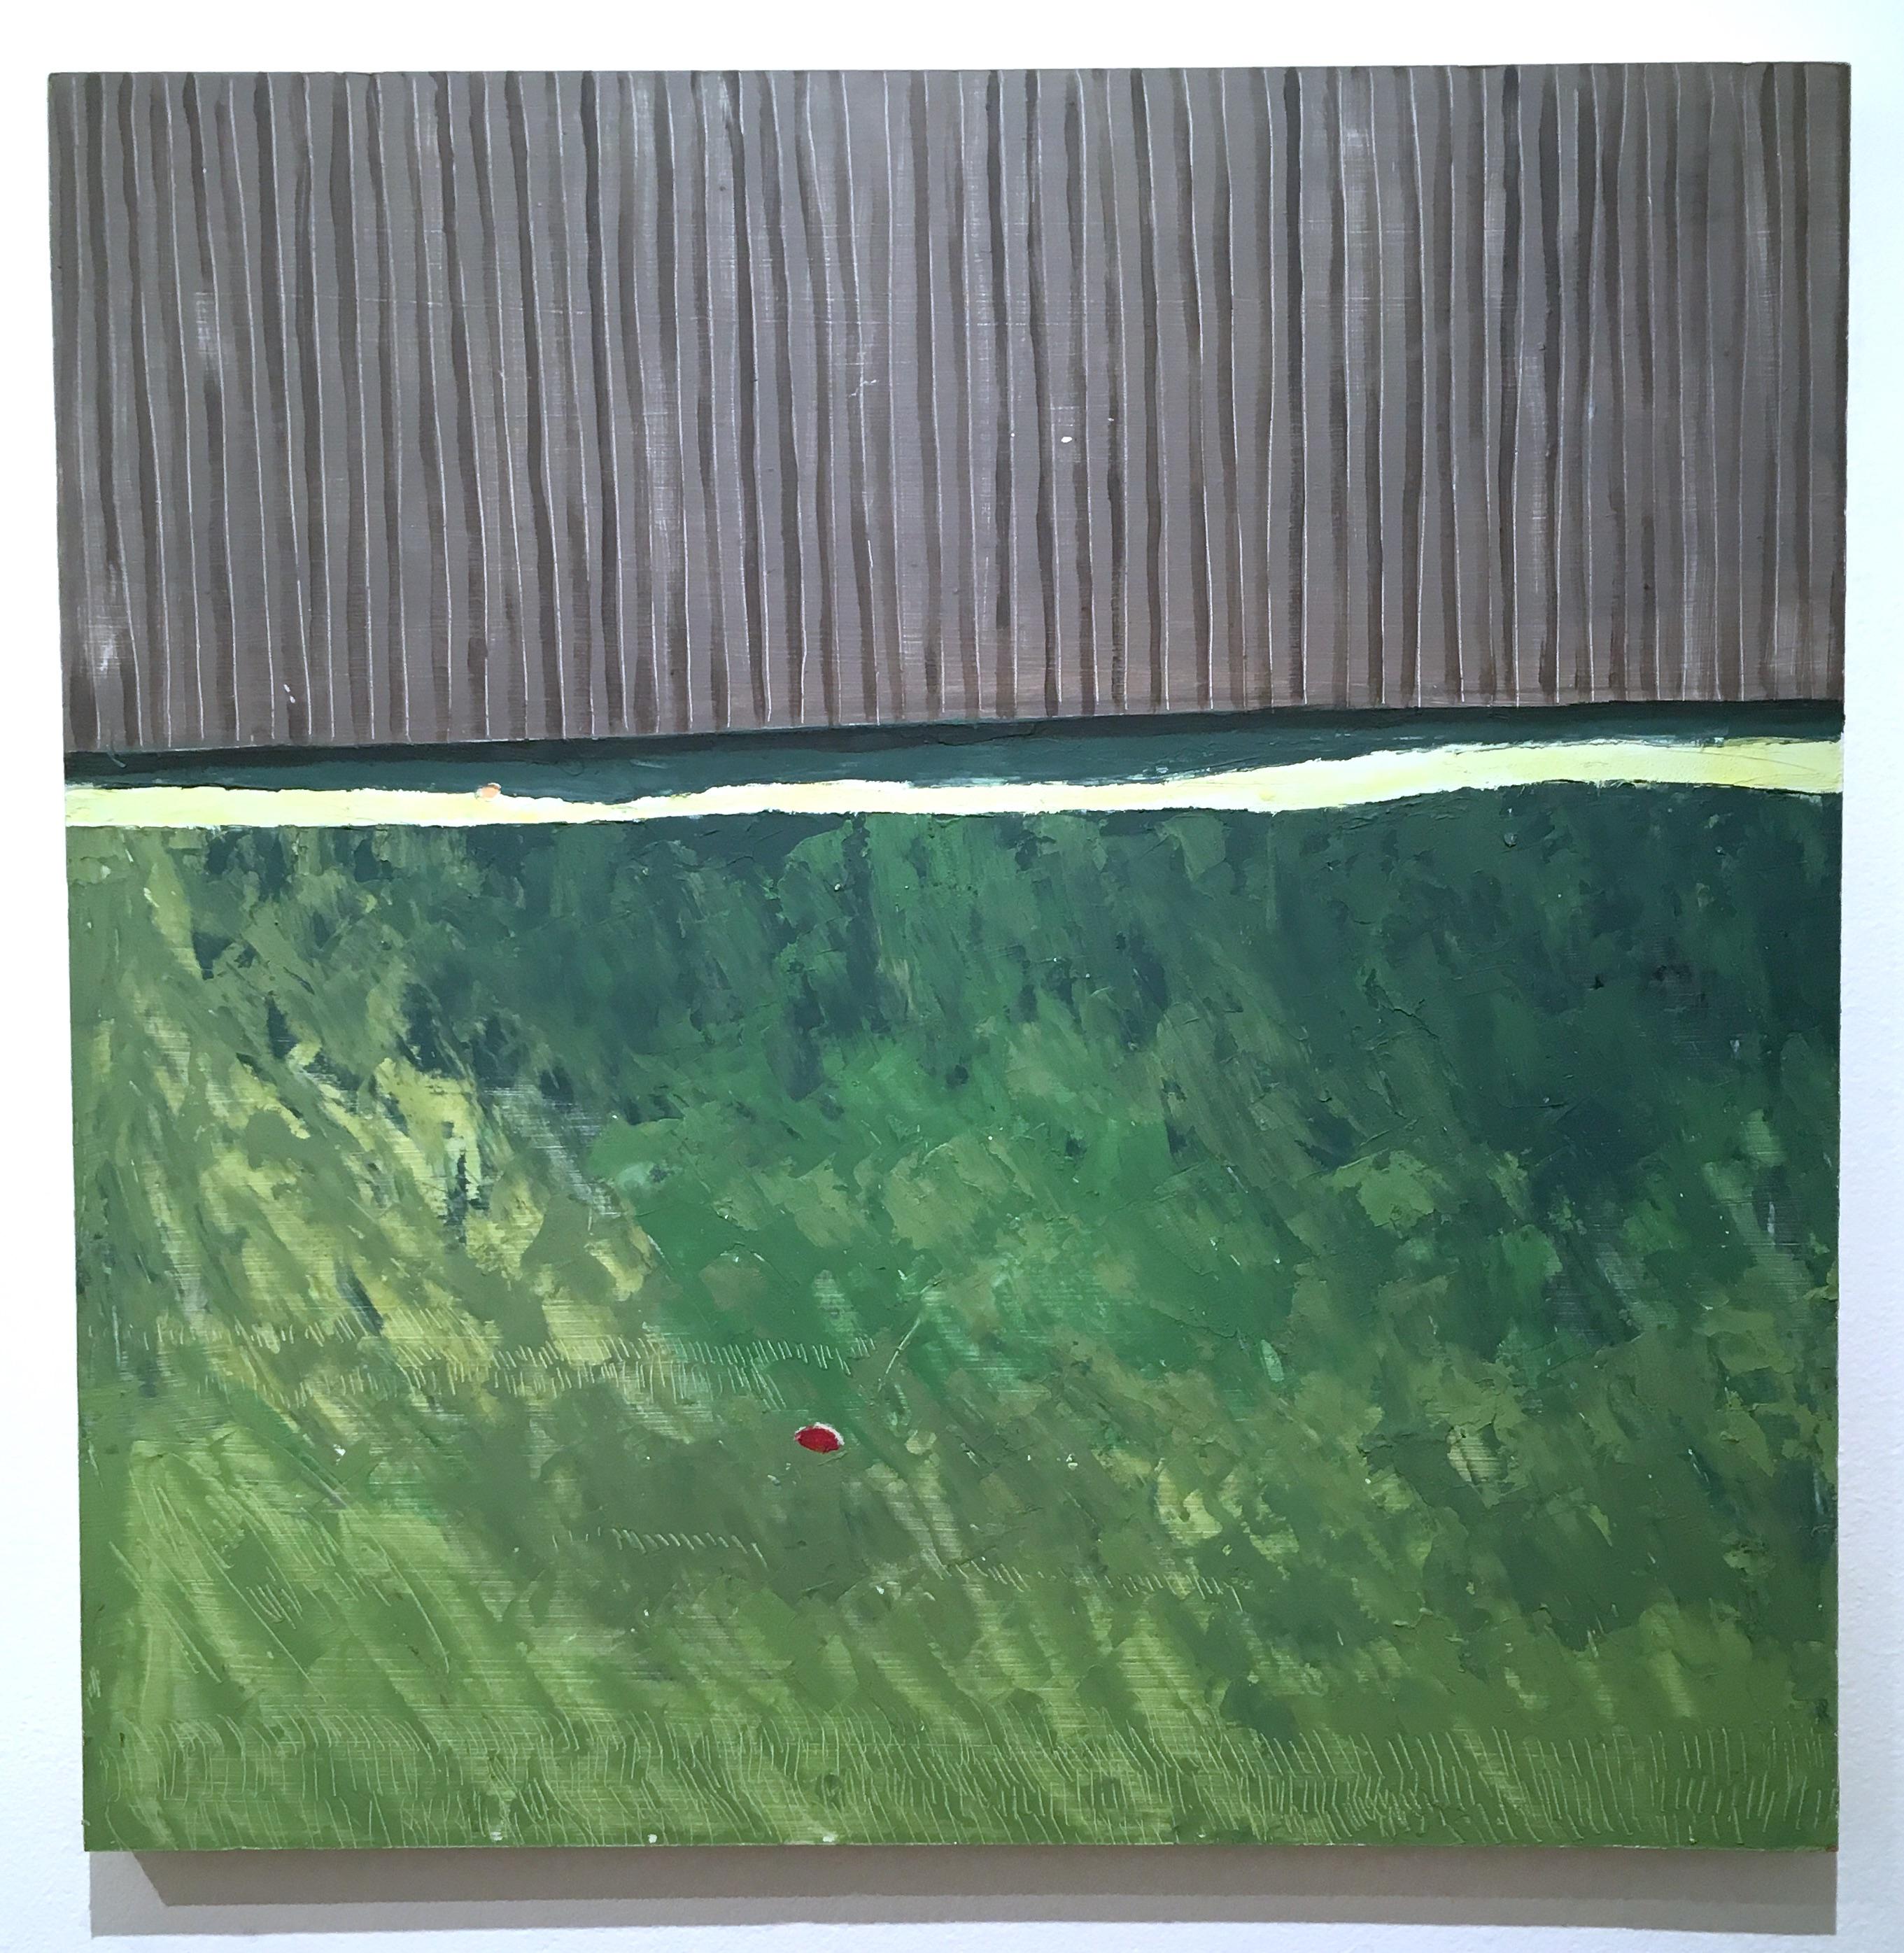 Yard (2016), Oil on panel, backyard landscape with green grass and gray fence - Painting by Francesca Reyes